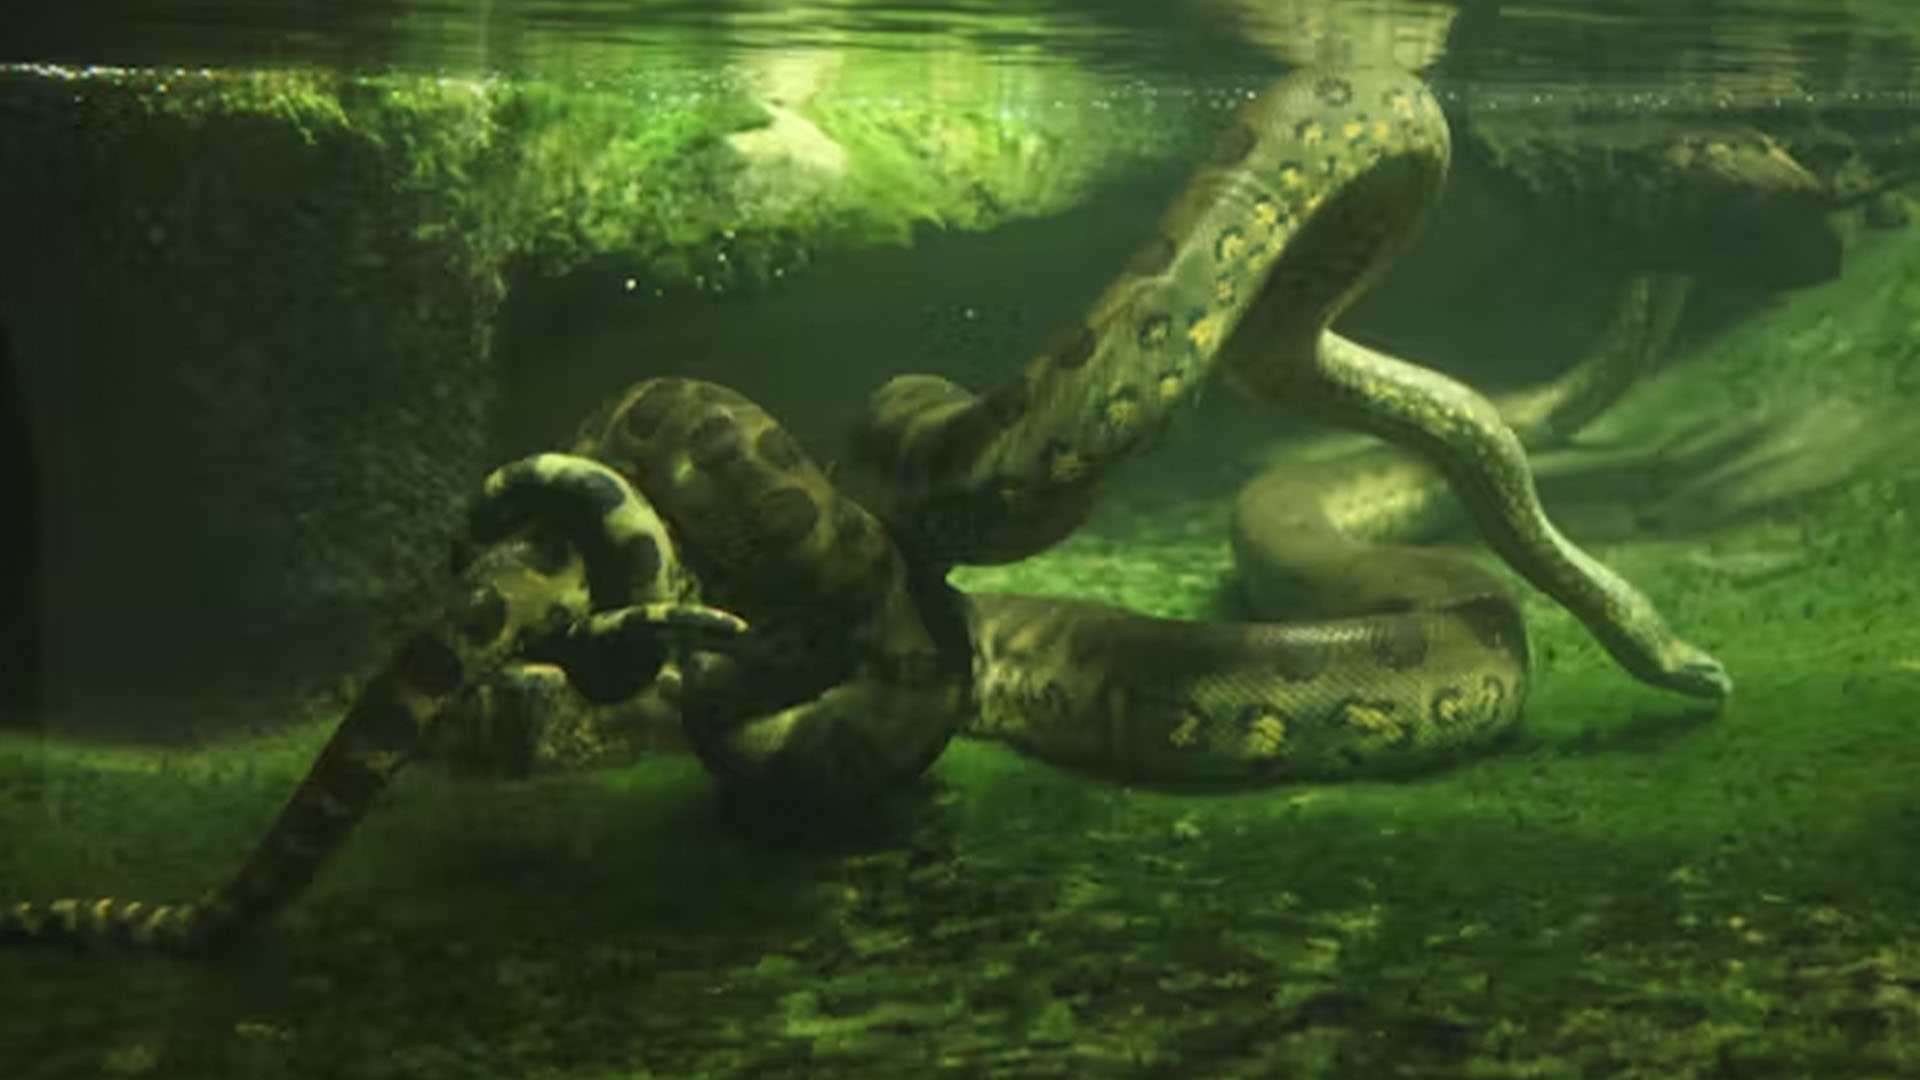 The two green anaconda species live much of their lives in water.